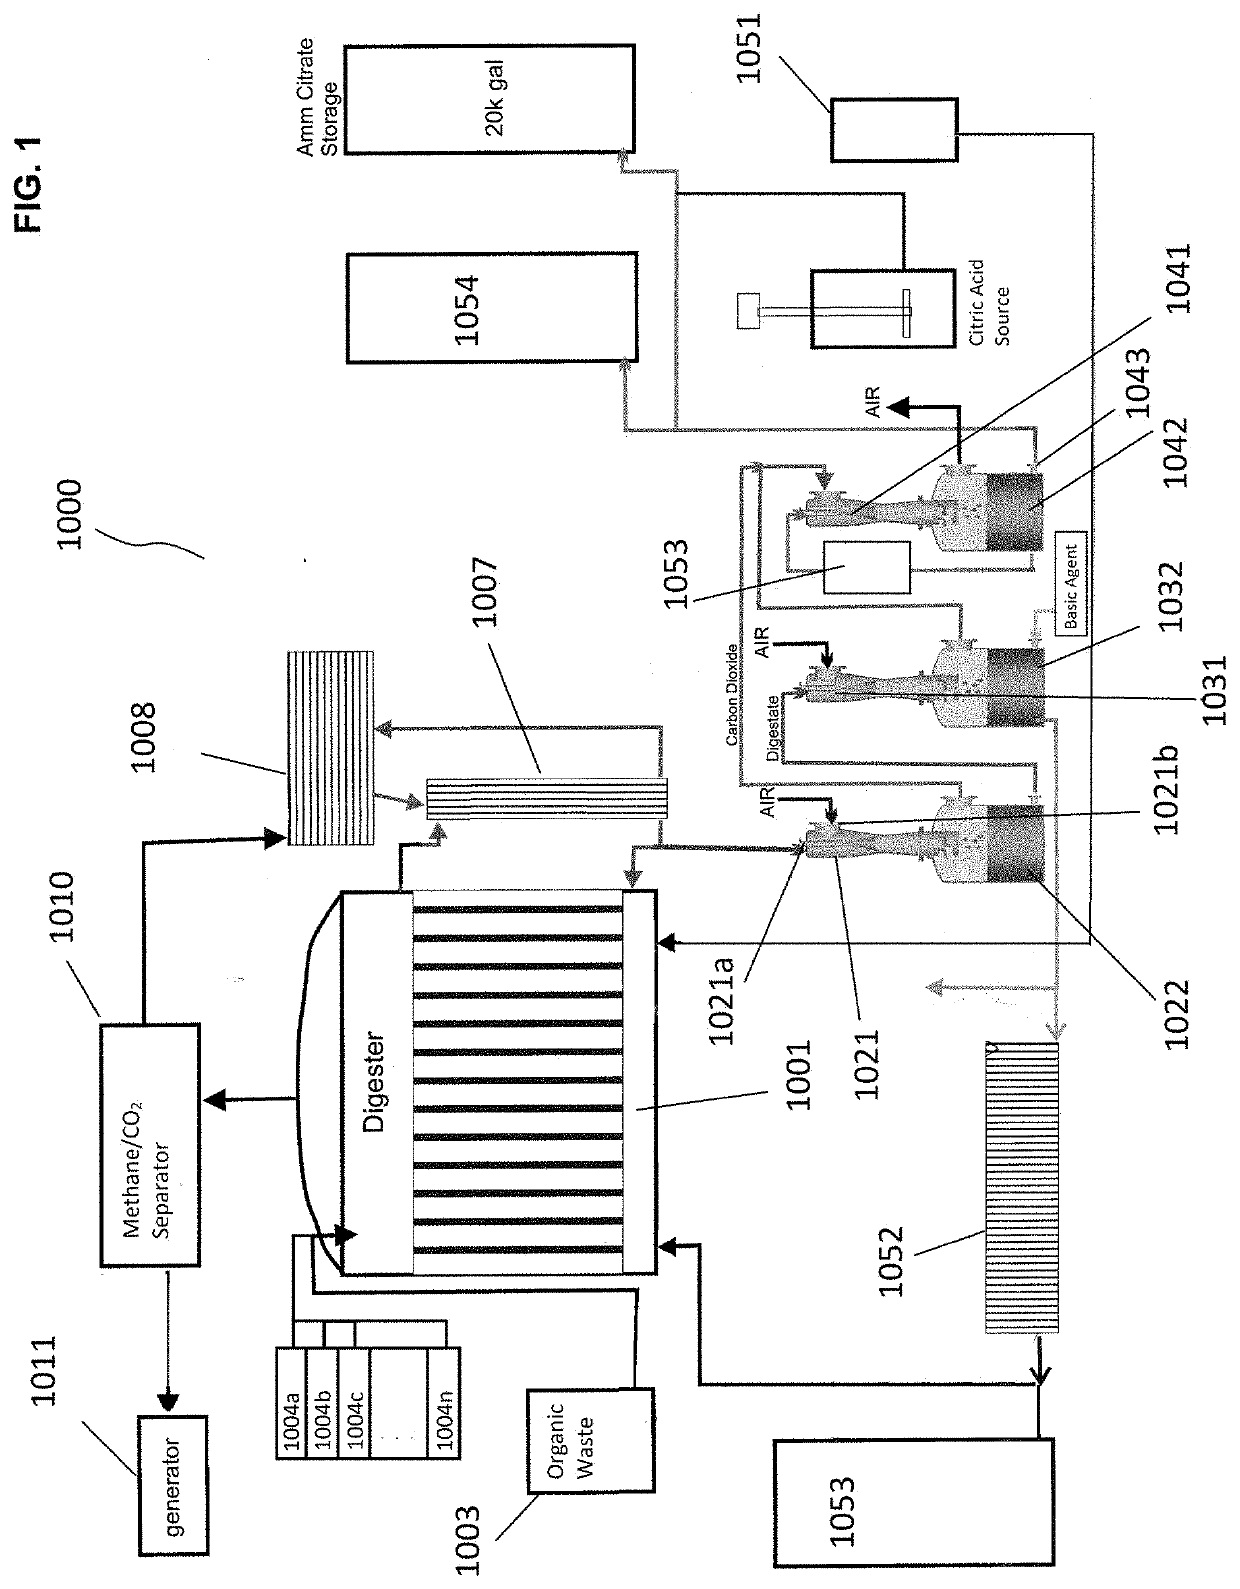 Manufacturing process for producing ammonia from anaerobic digestate liquid